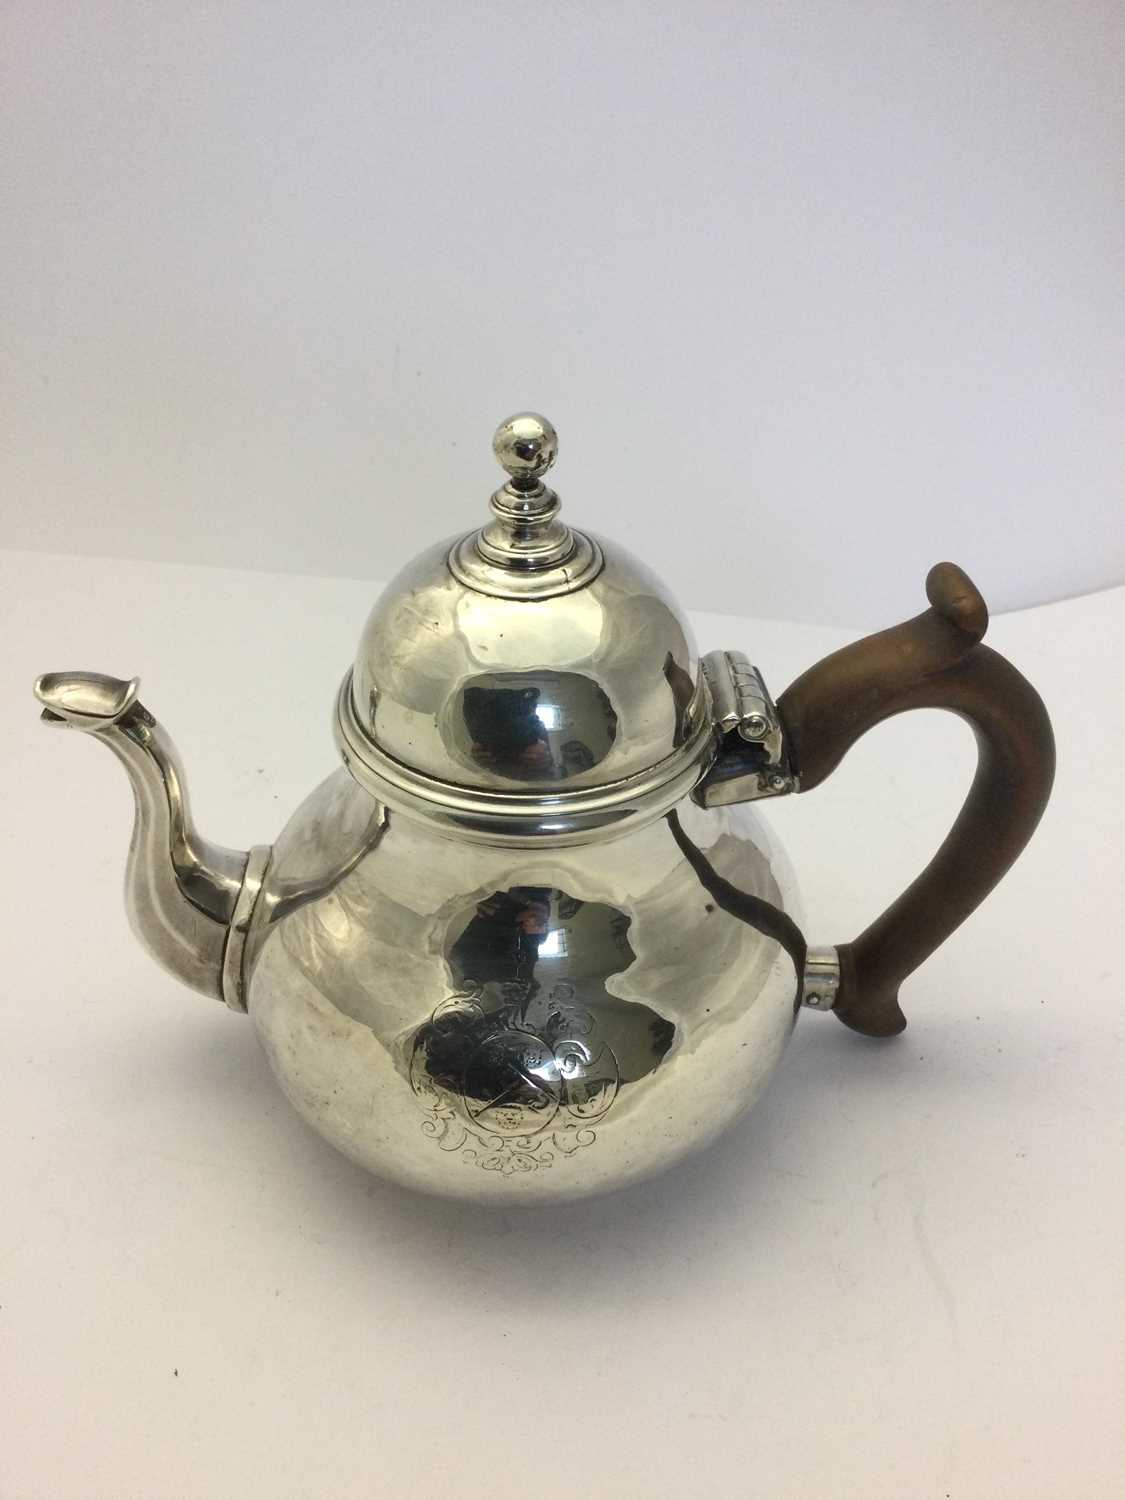 A Queen Anne Silver Teapot, by William Gamble, London, 1712 - Image 2 of 6